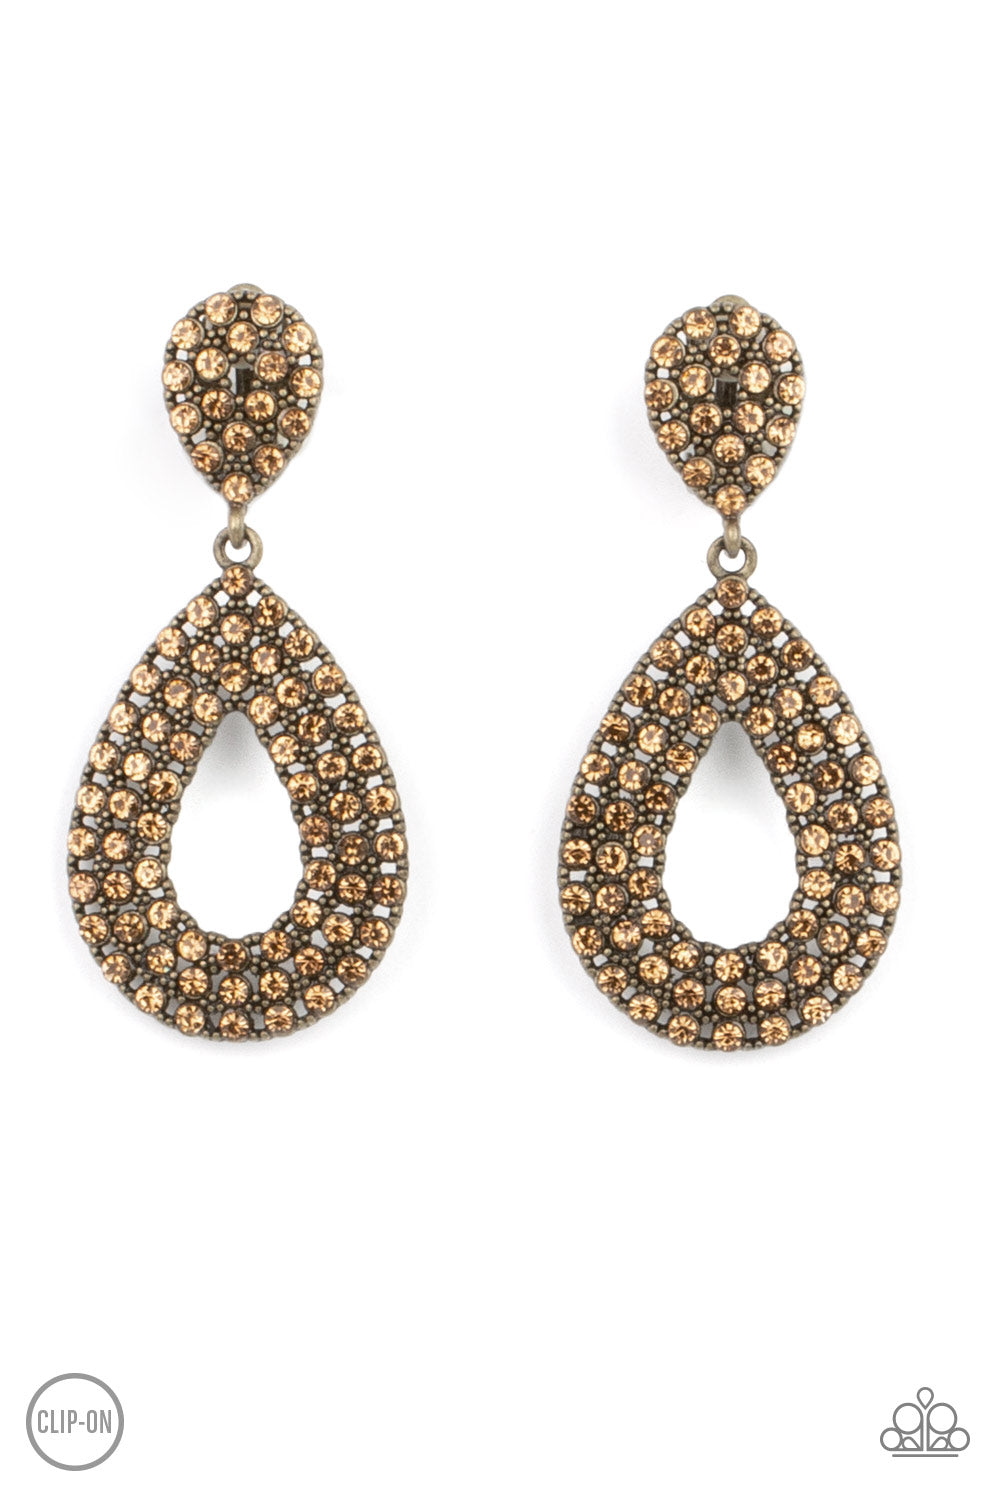 Paparazzi Accessories Earrings - A topaz rhinestone encrusted silhouette teardrop attaches to the bottom of a dainty topaz rhinestone encrusted teardrop, creating a glamorous lure. 